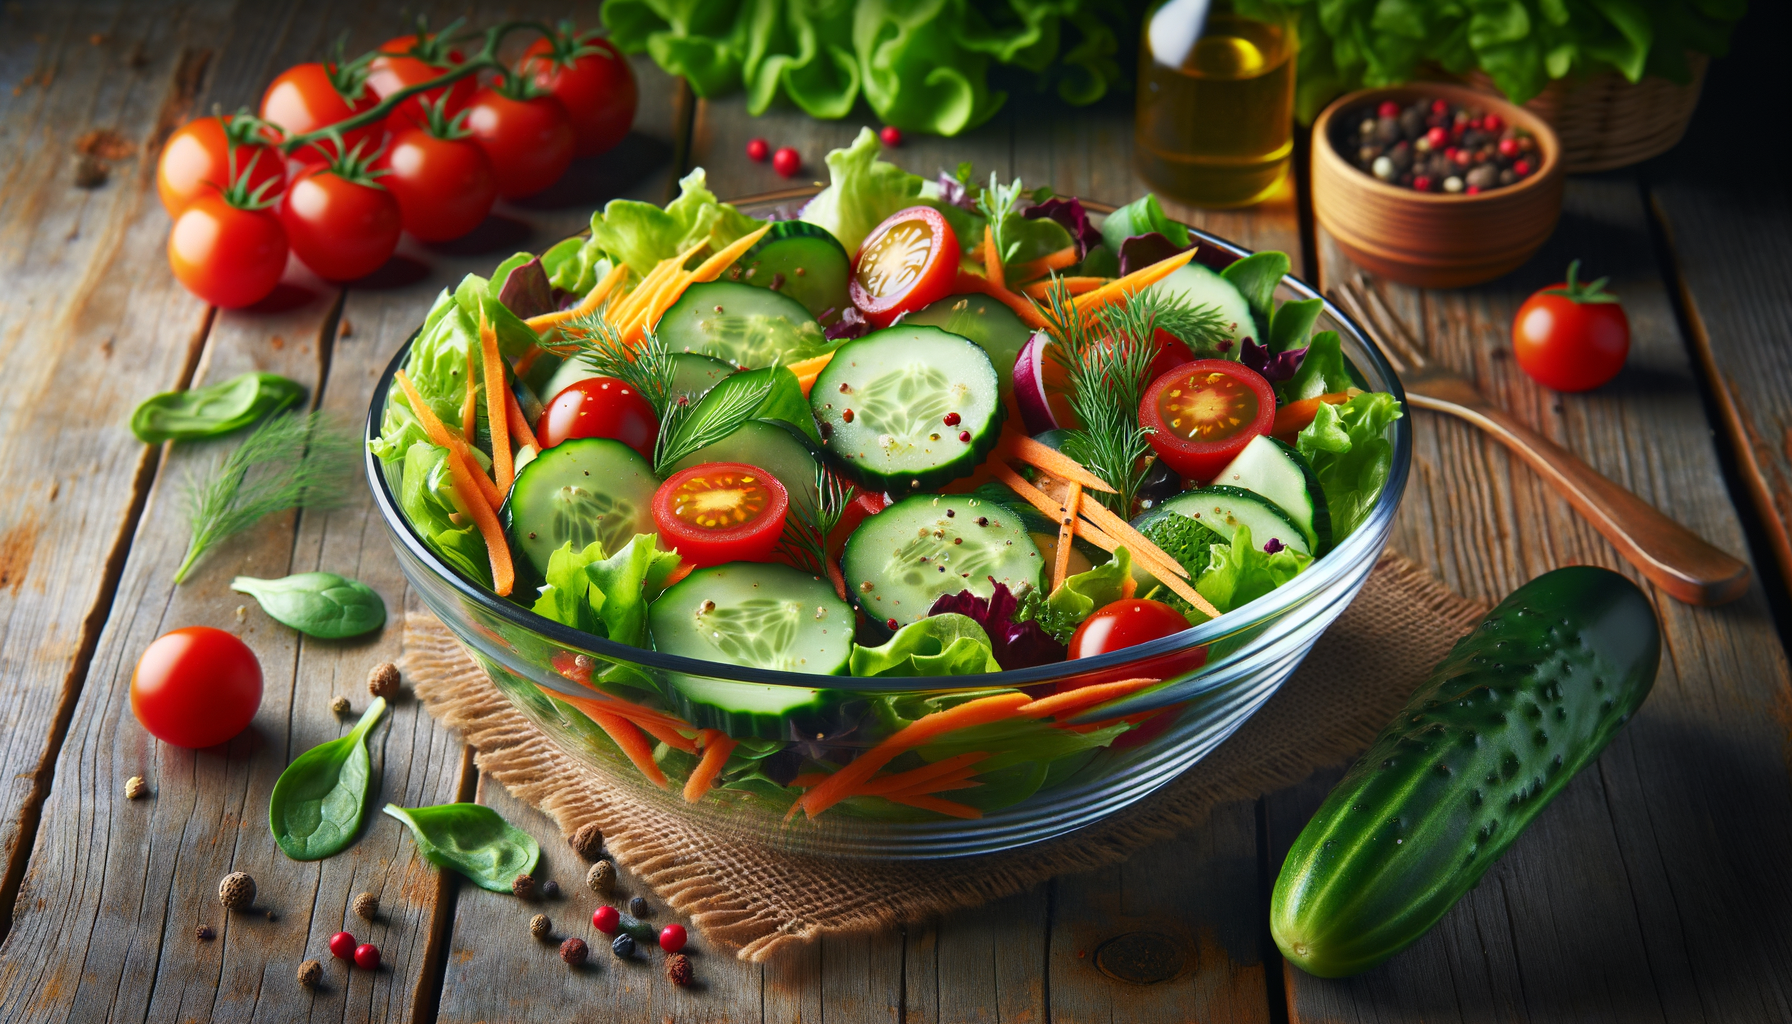 Fresh garden salad bowl with mixed greens, cherry tomatoes, cucumbers, and carrots